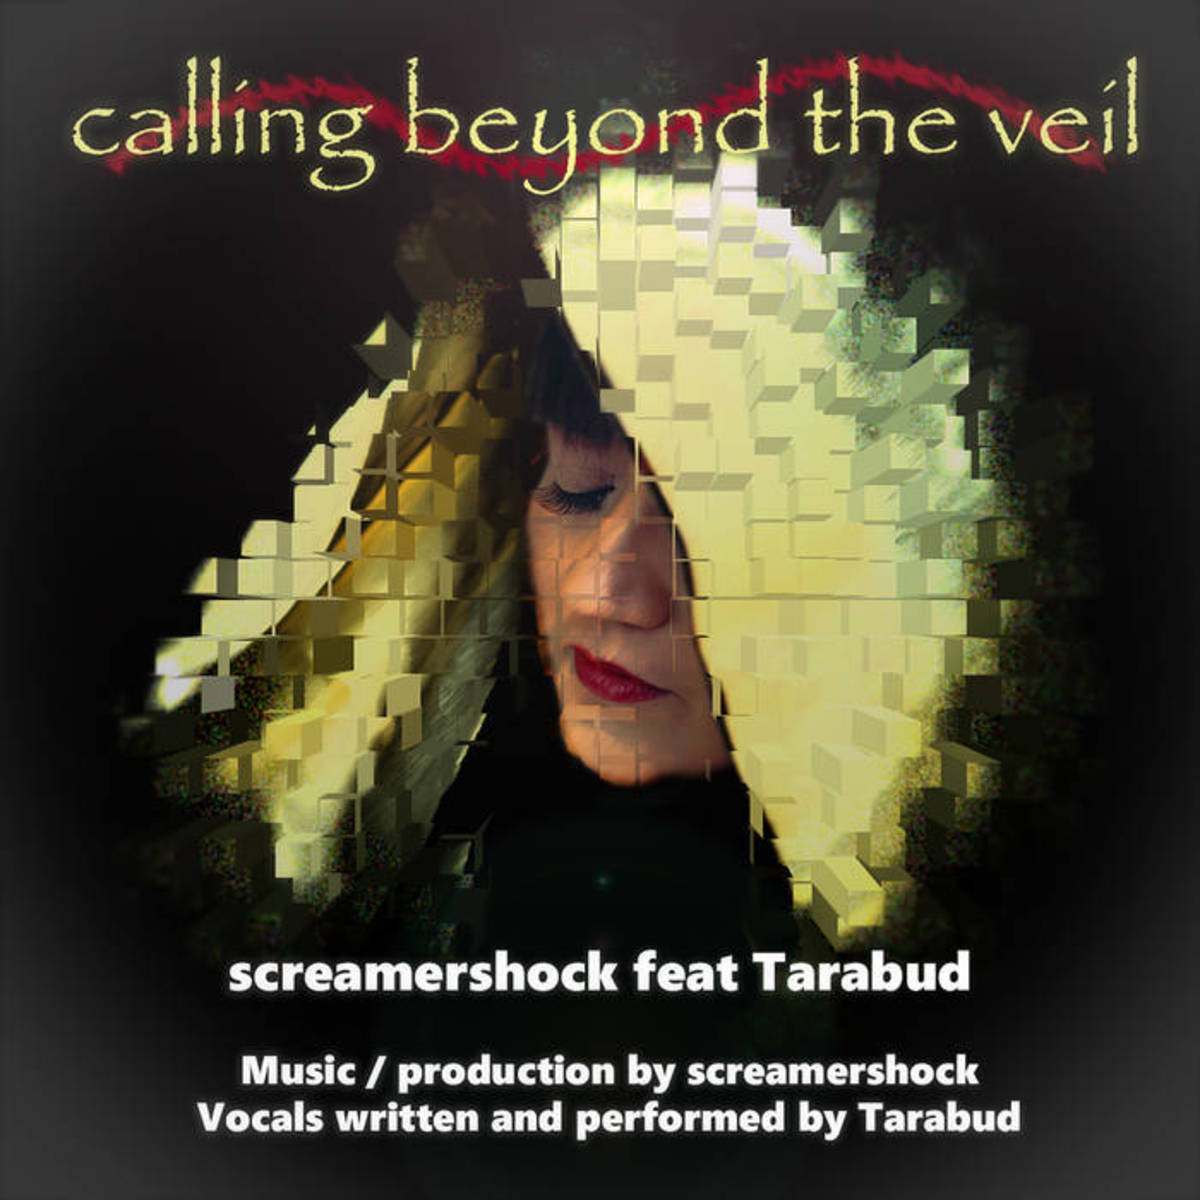 synth-single-review-calling-beyond-the-veil-by-screamershock-feat-tarabud